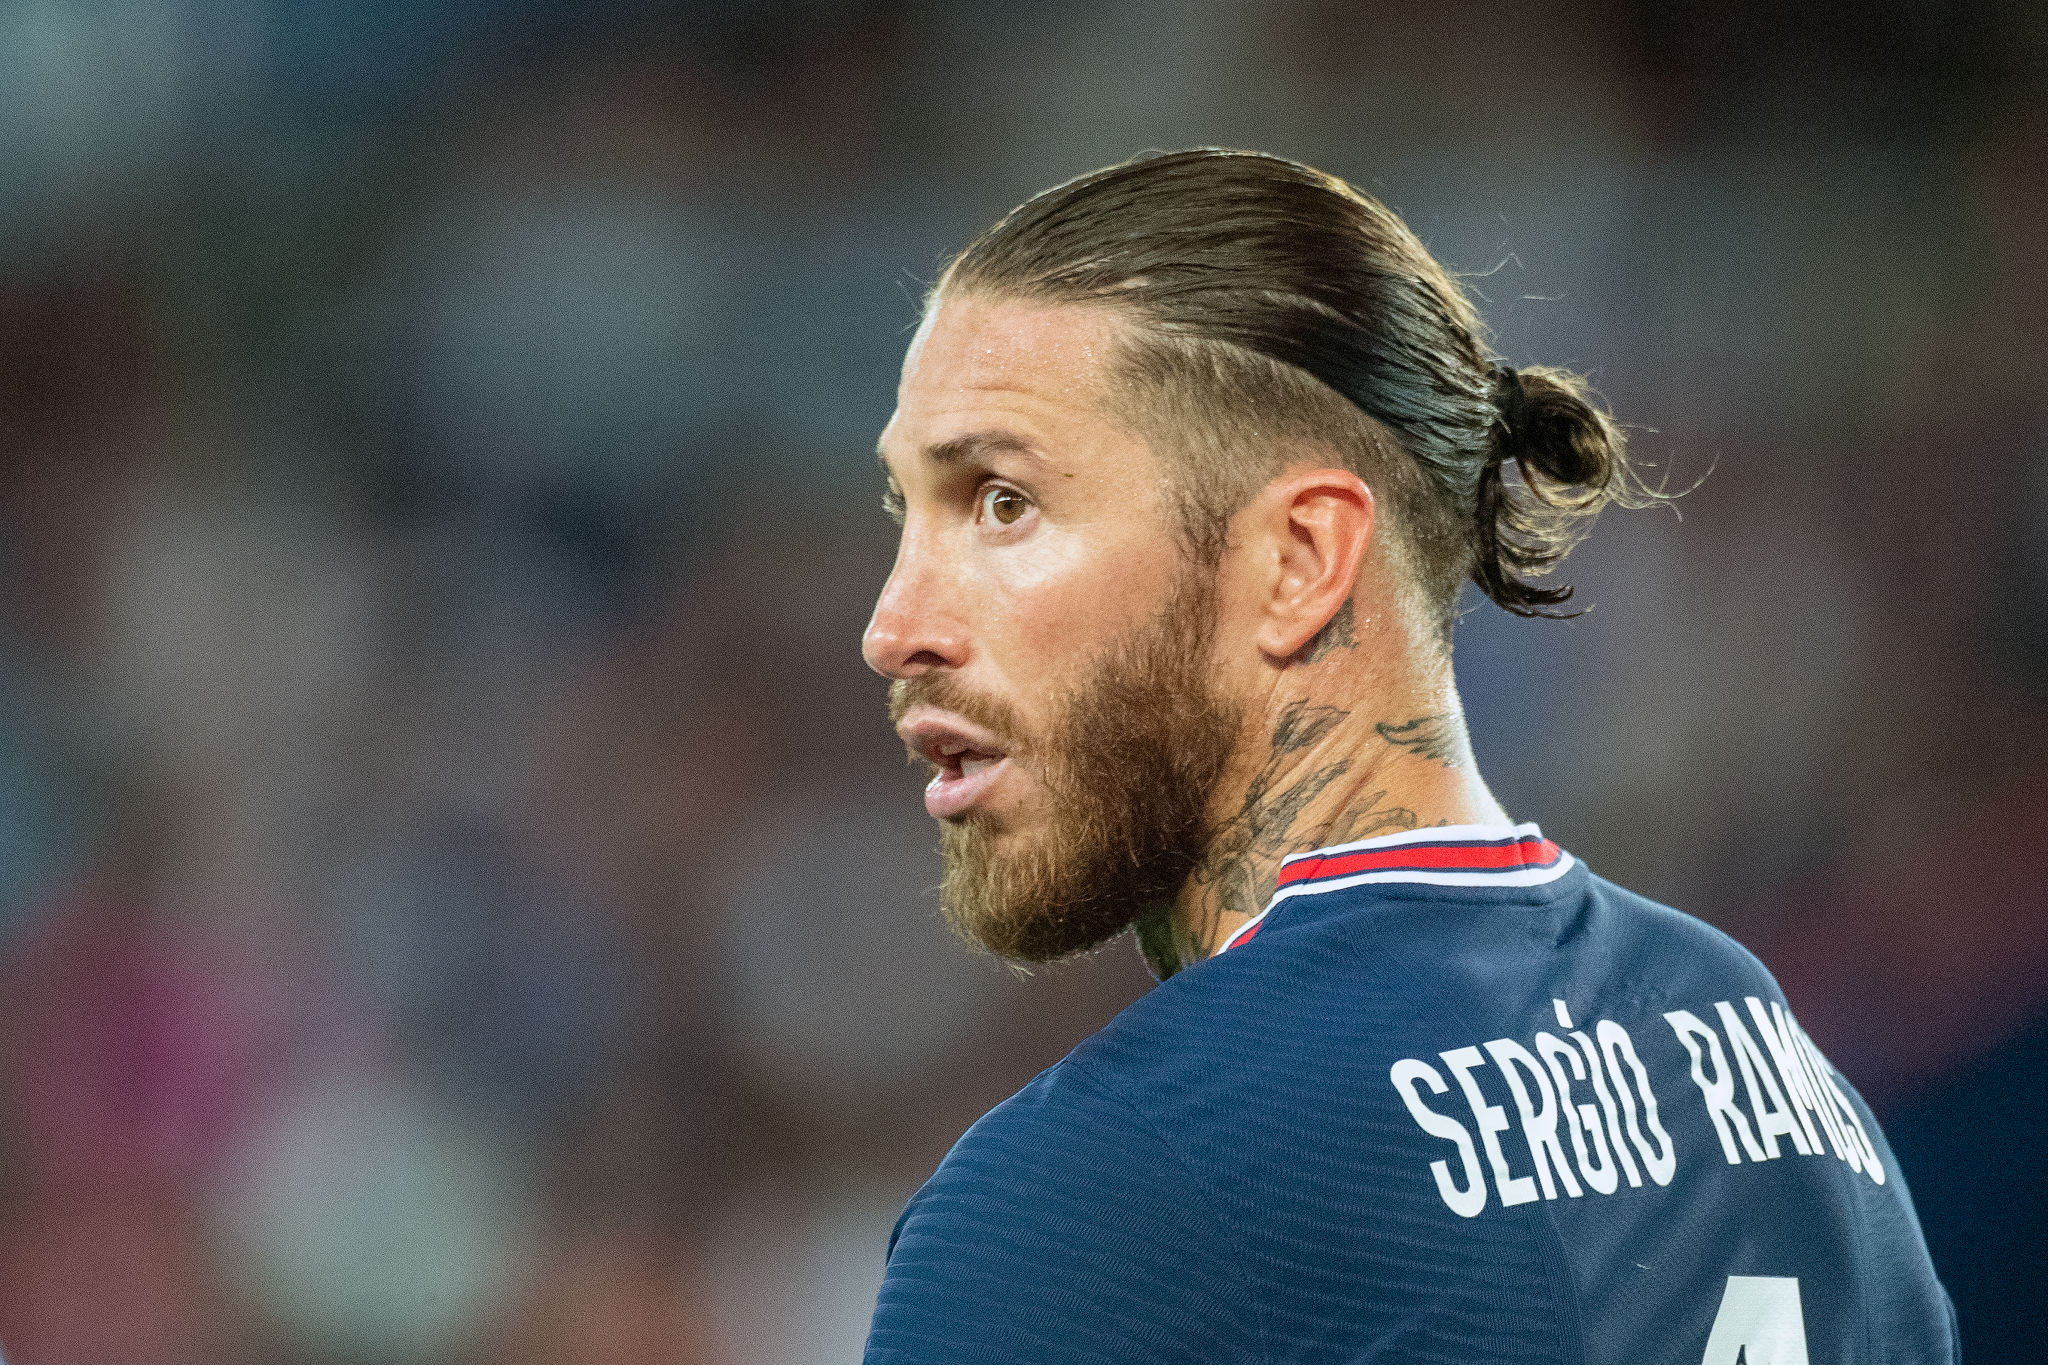 Download Sergio Ramos Wallpaper Free for Android - Sergio Ramos Wallpaper  APK Download - STEPrimo.com